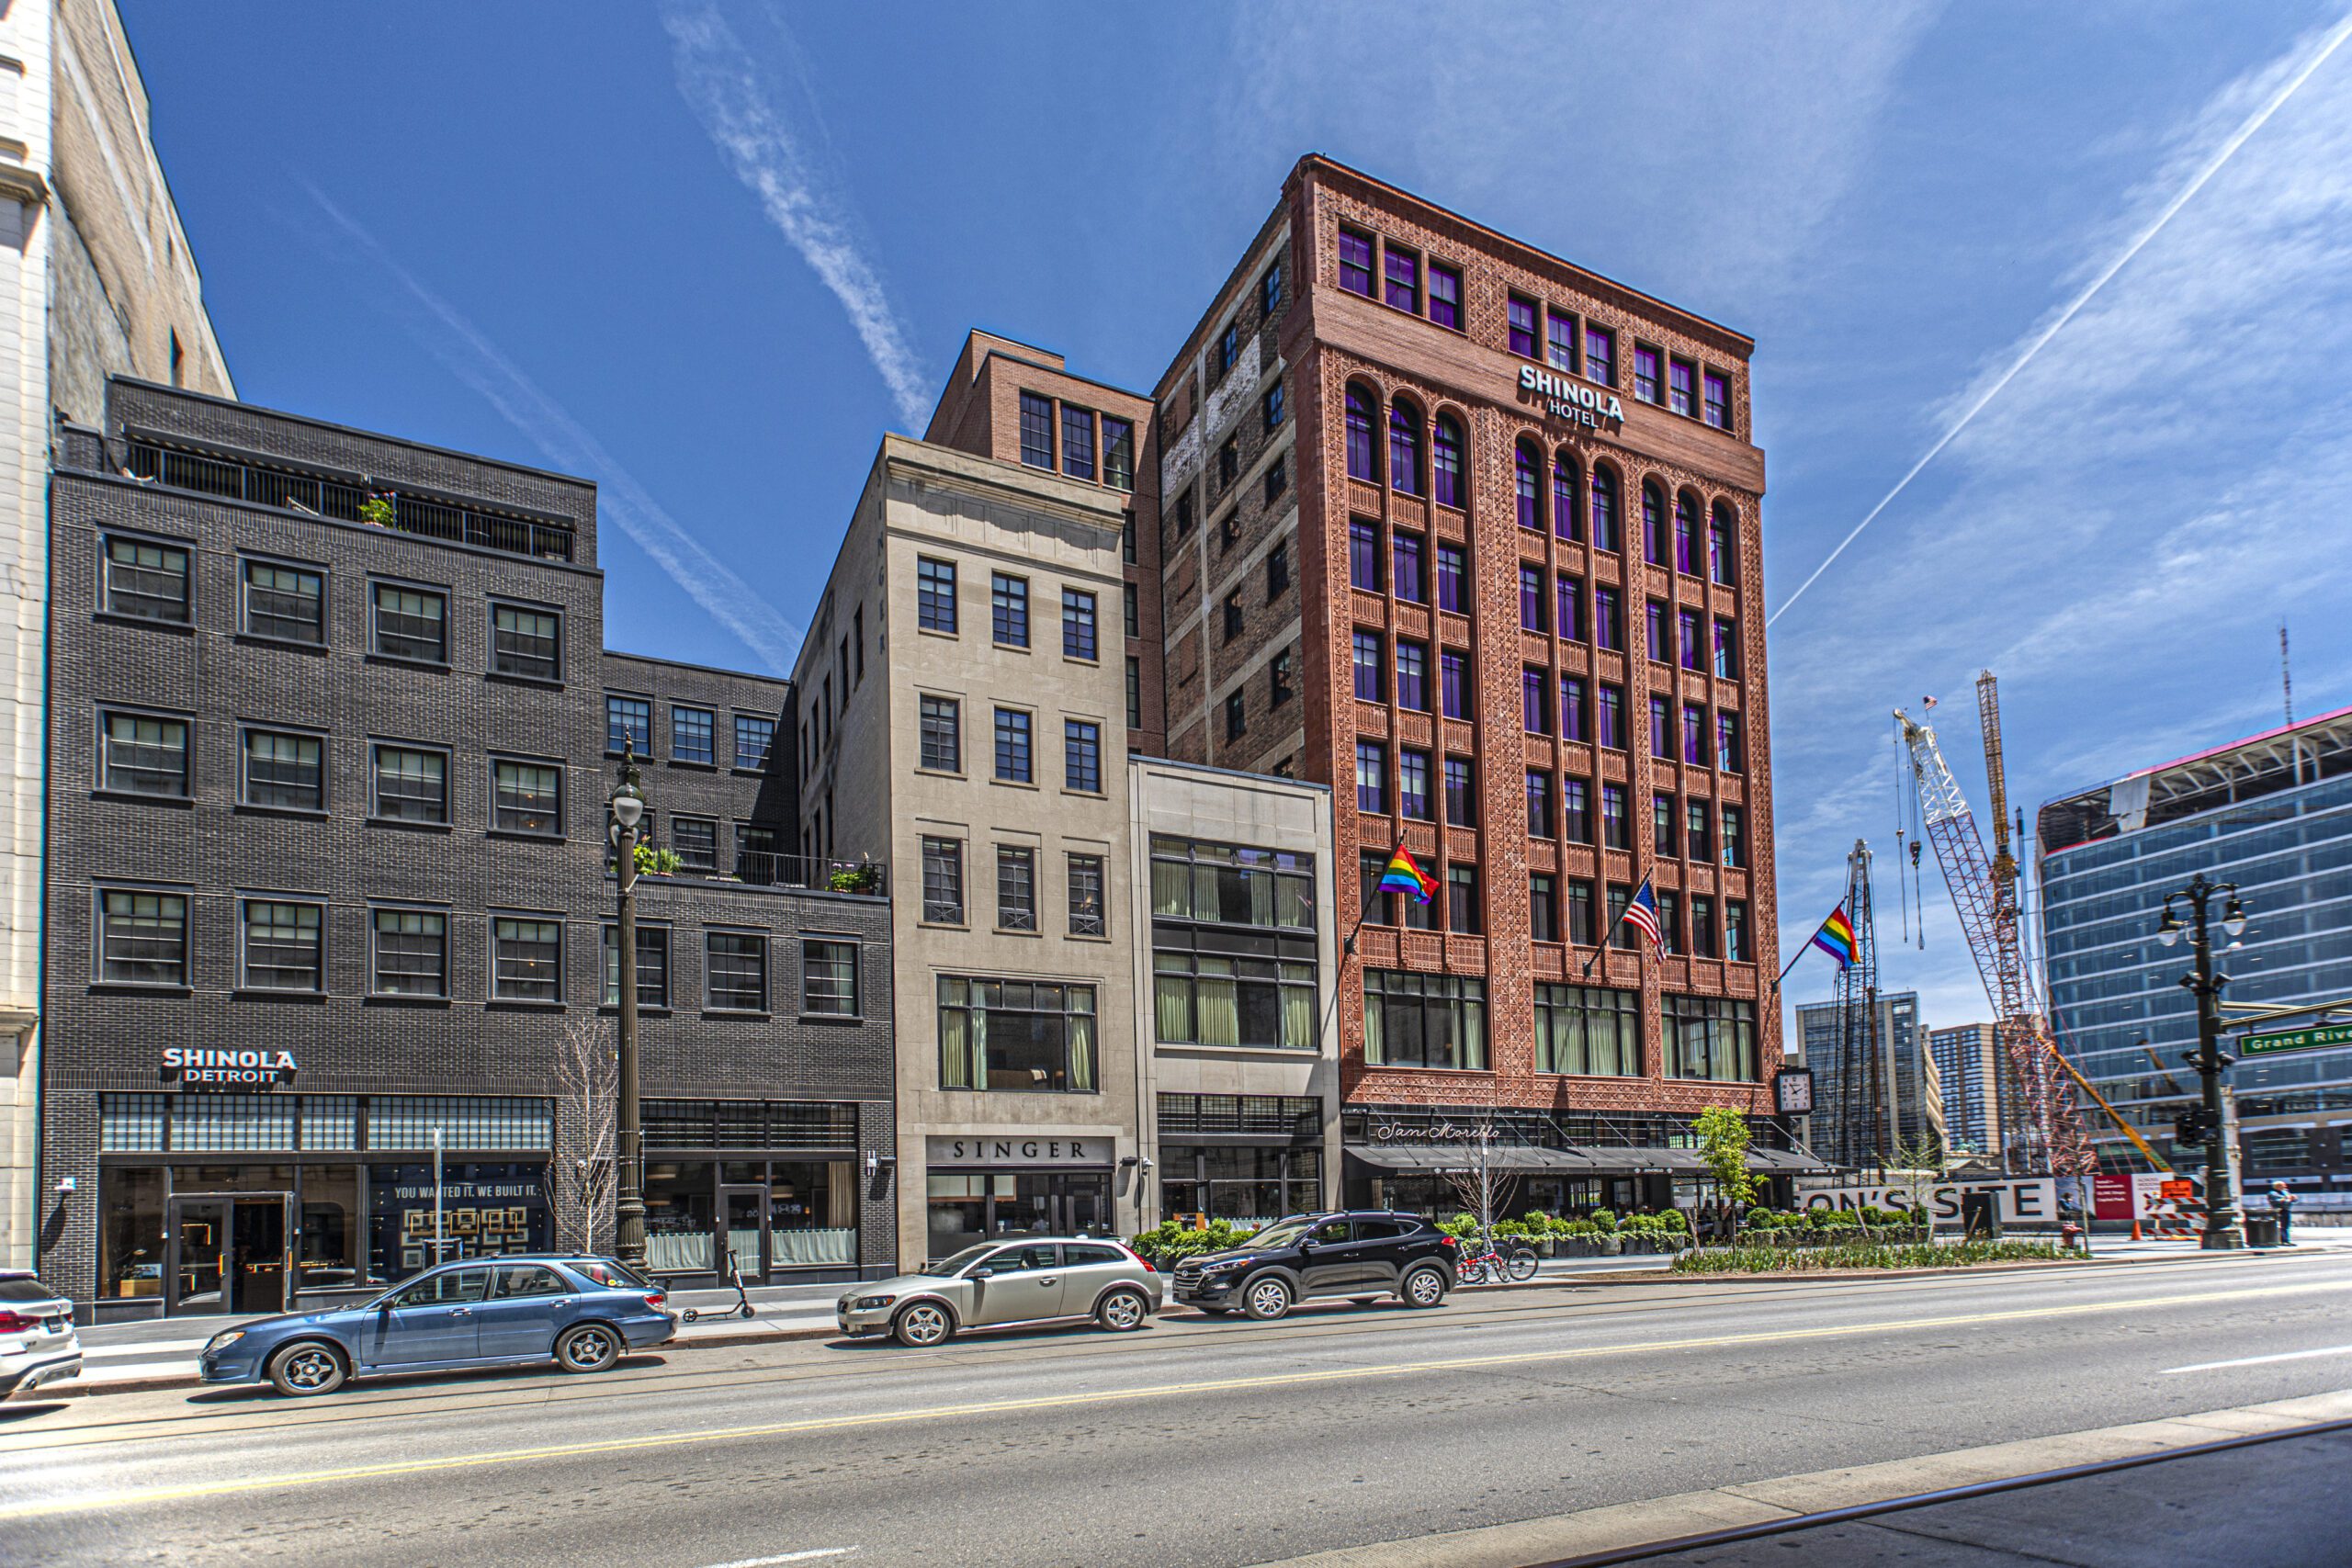 Street view of Shinola Hotel exterior, a historic commercial renovation project